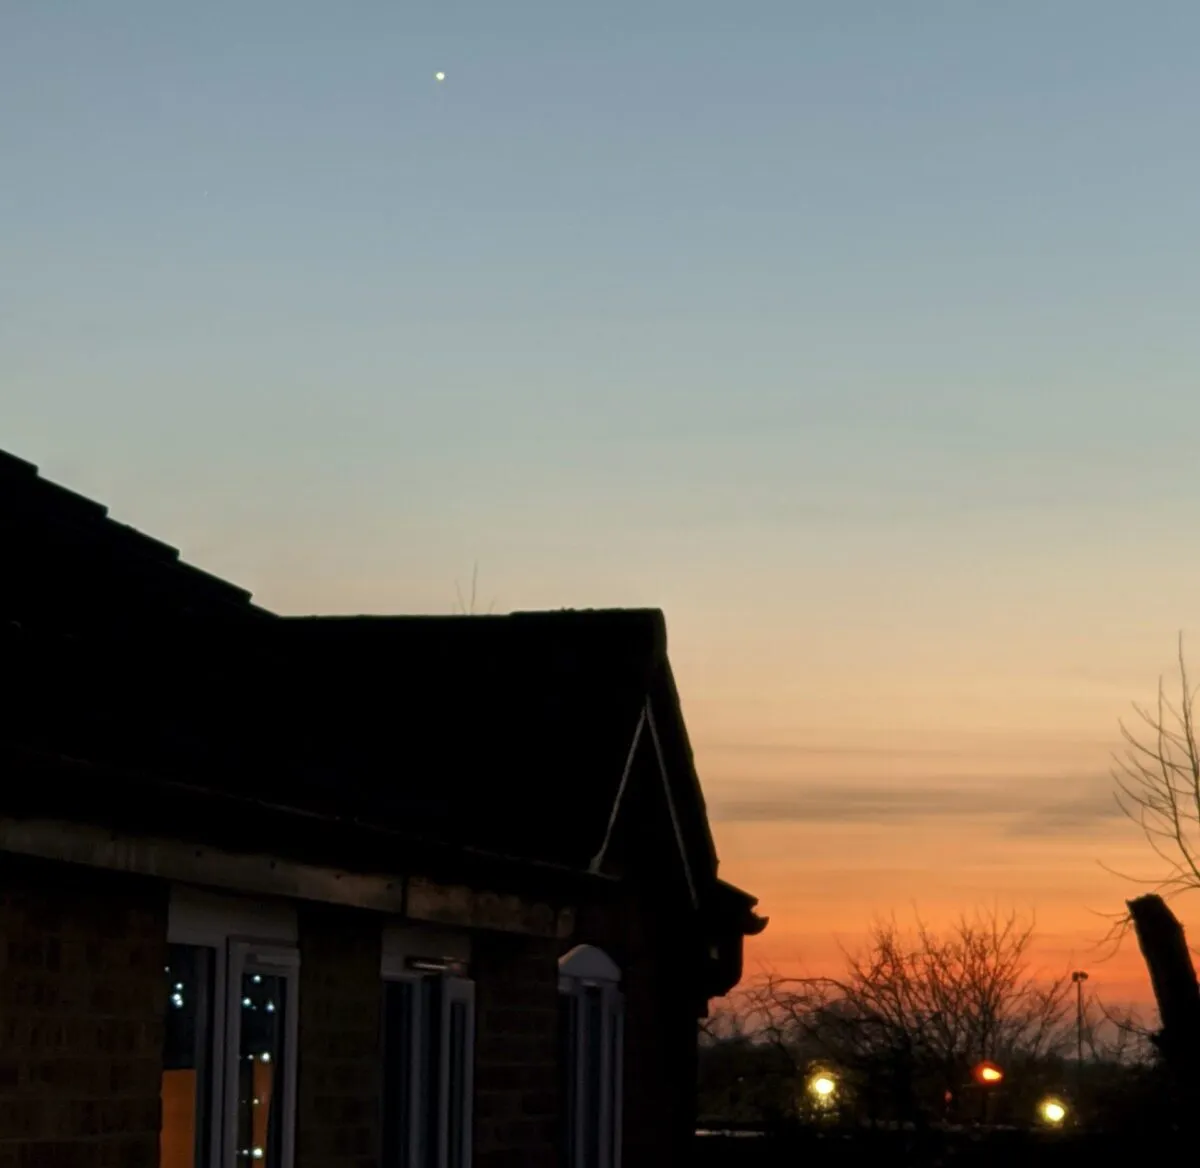 Venus in twilight, captured on 25 December 2019, 4:31pm GMT with a Google Pixel smartphone. Zoom 2.42x. Exposure: 0.25", f/2.4, ISO 120. Credit: Paul Money